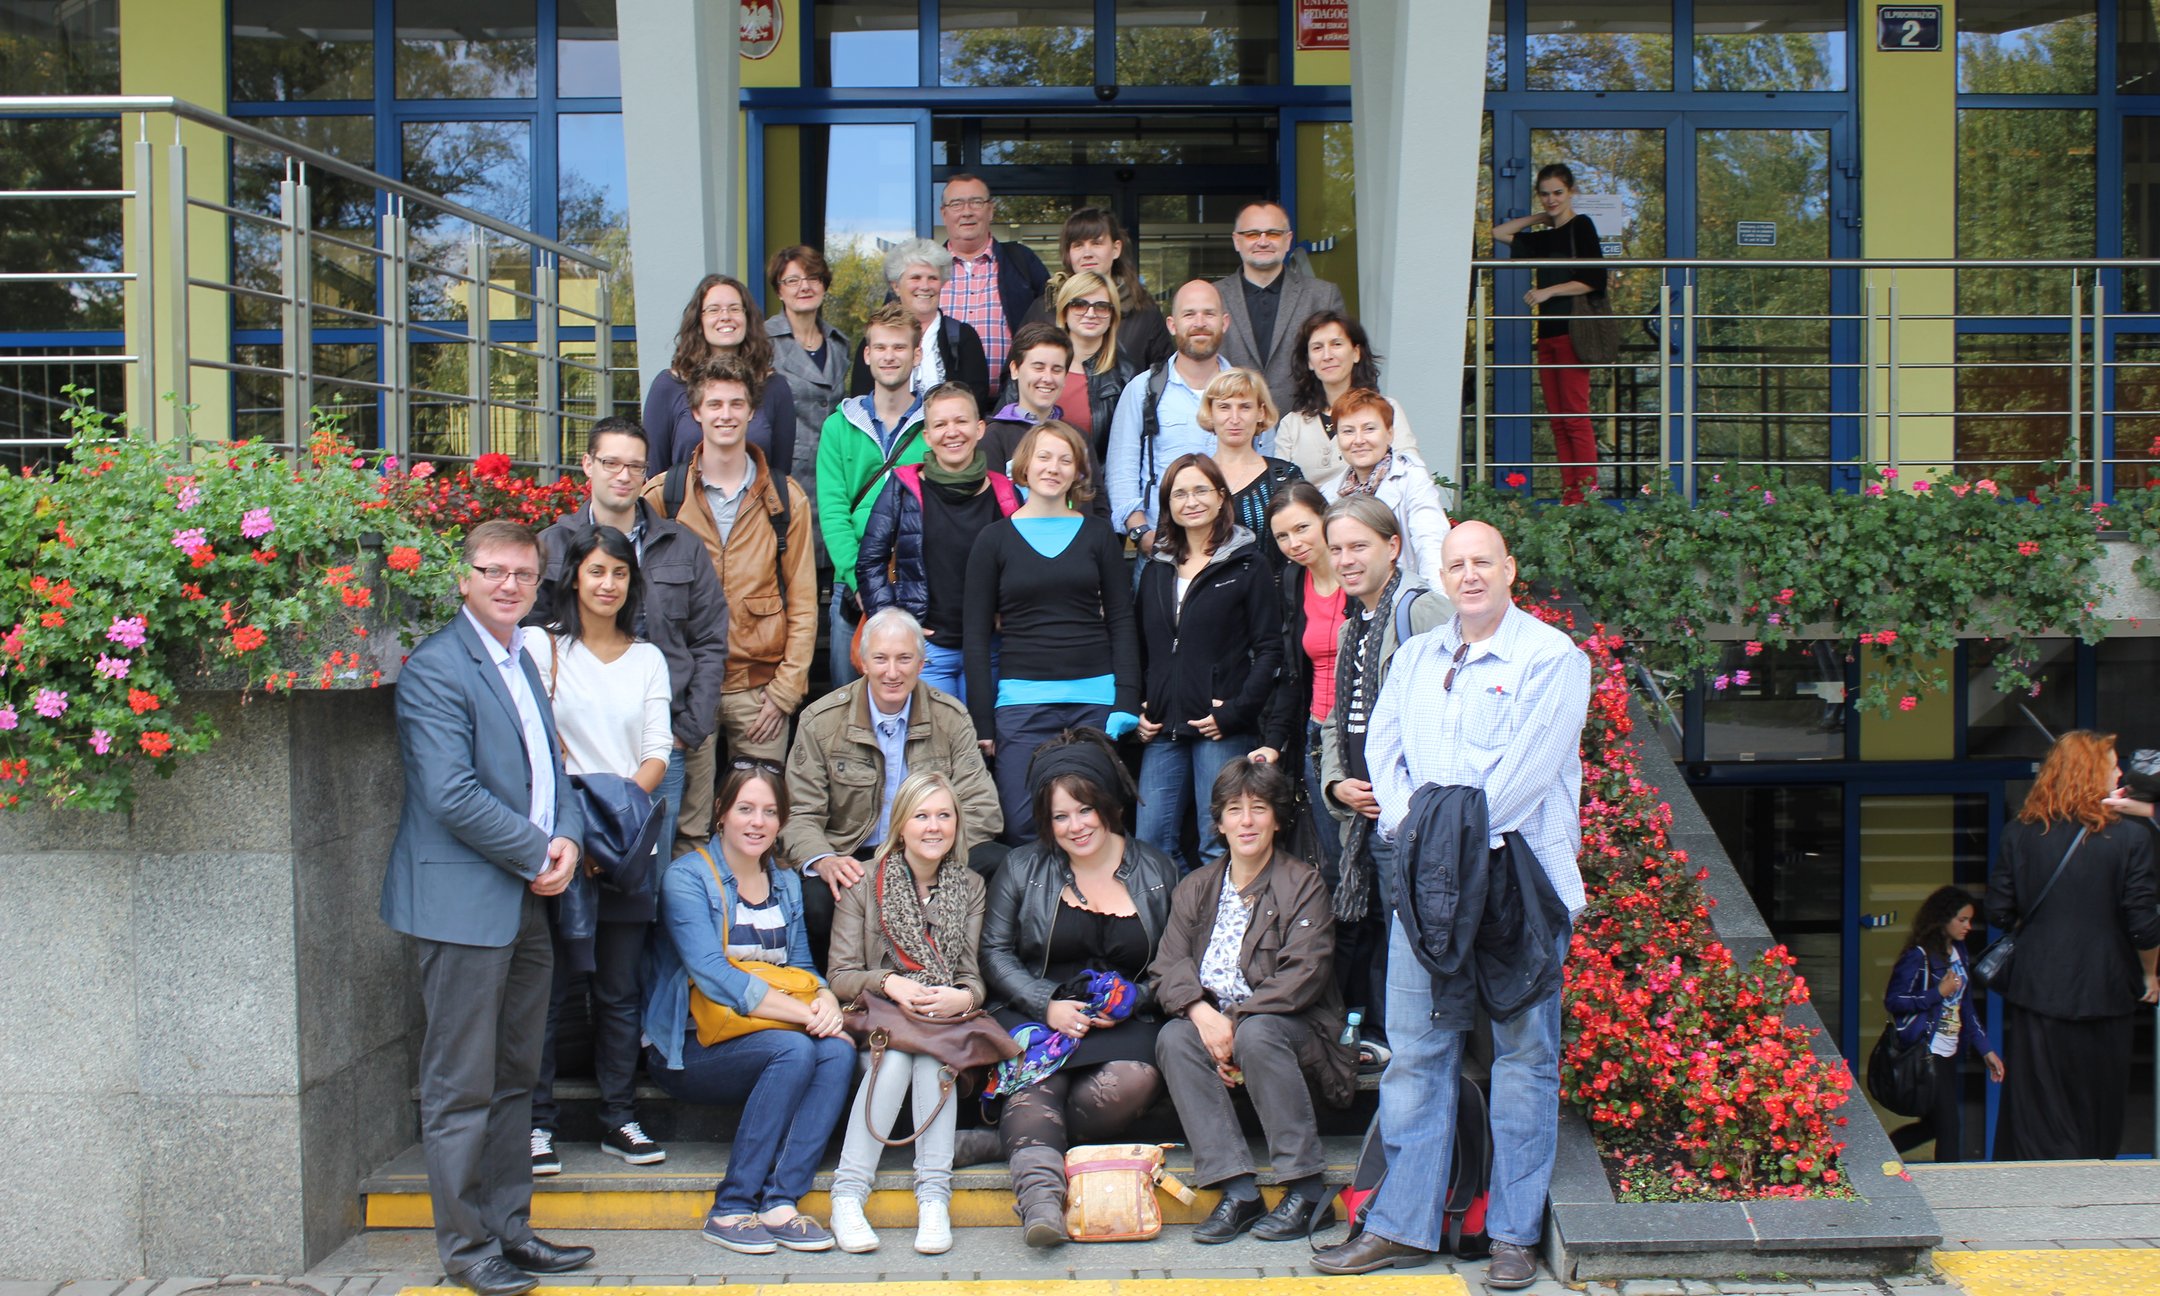 Participants in front of the Pedagogical University in Cracow (September 2012)